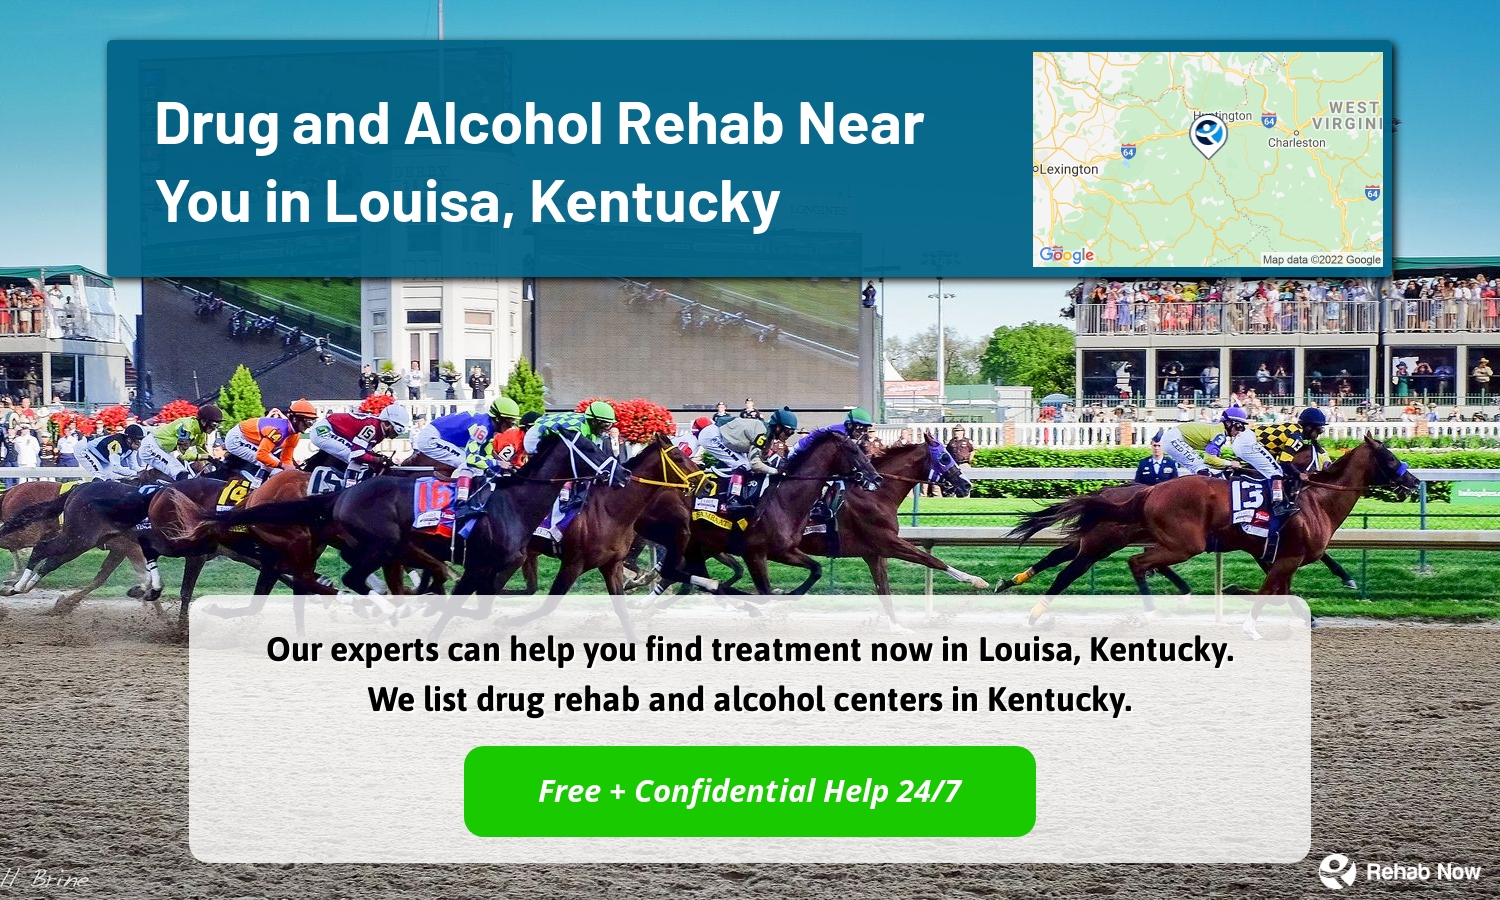 Our experts can help you find treatment now in Louisa, Kentucky. We list drug rehab and alcohol centers in Kentucky.